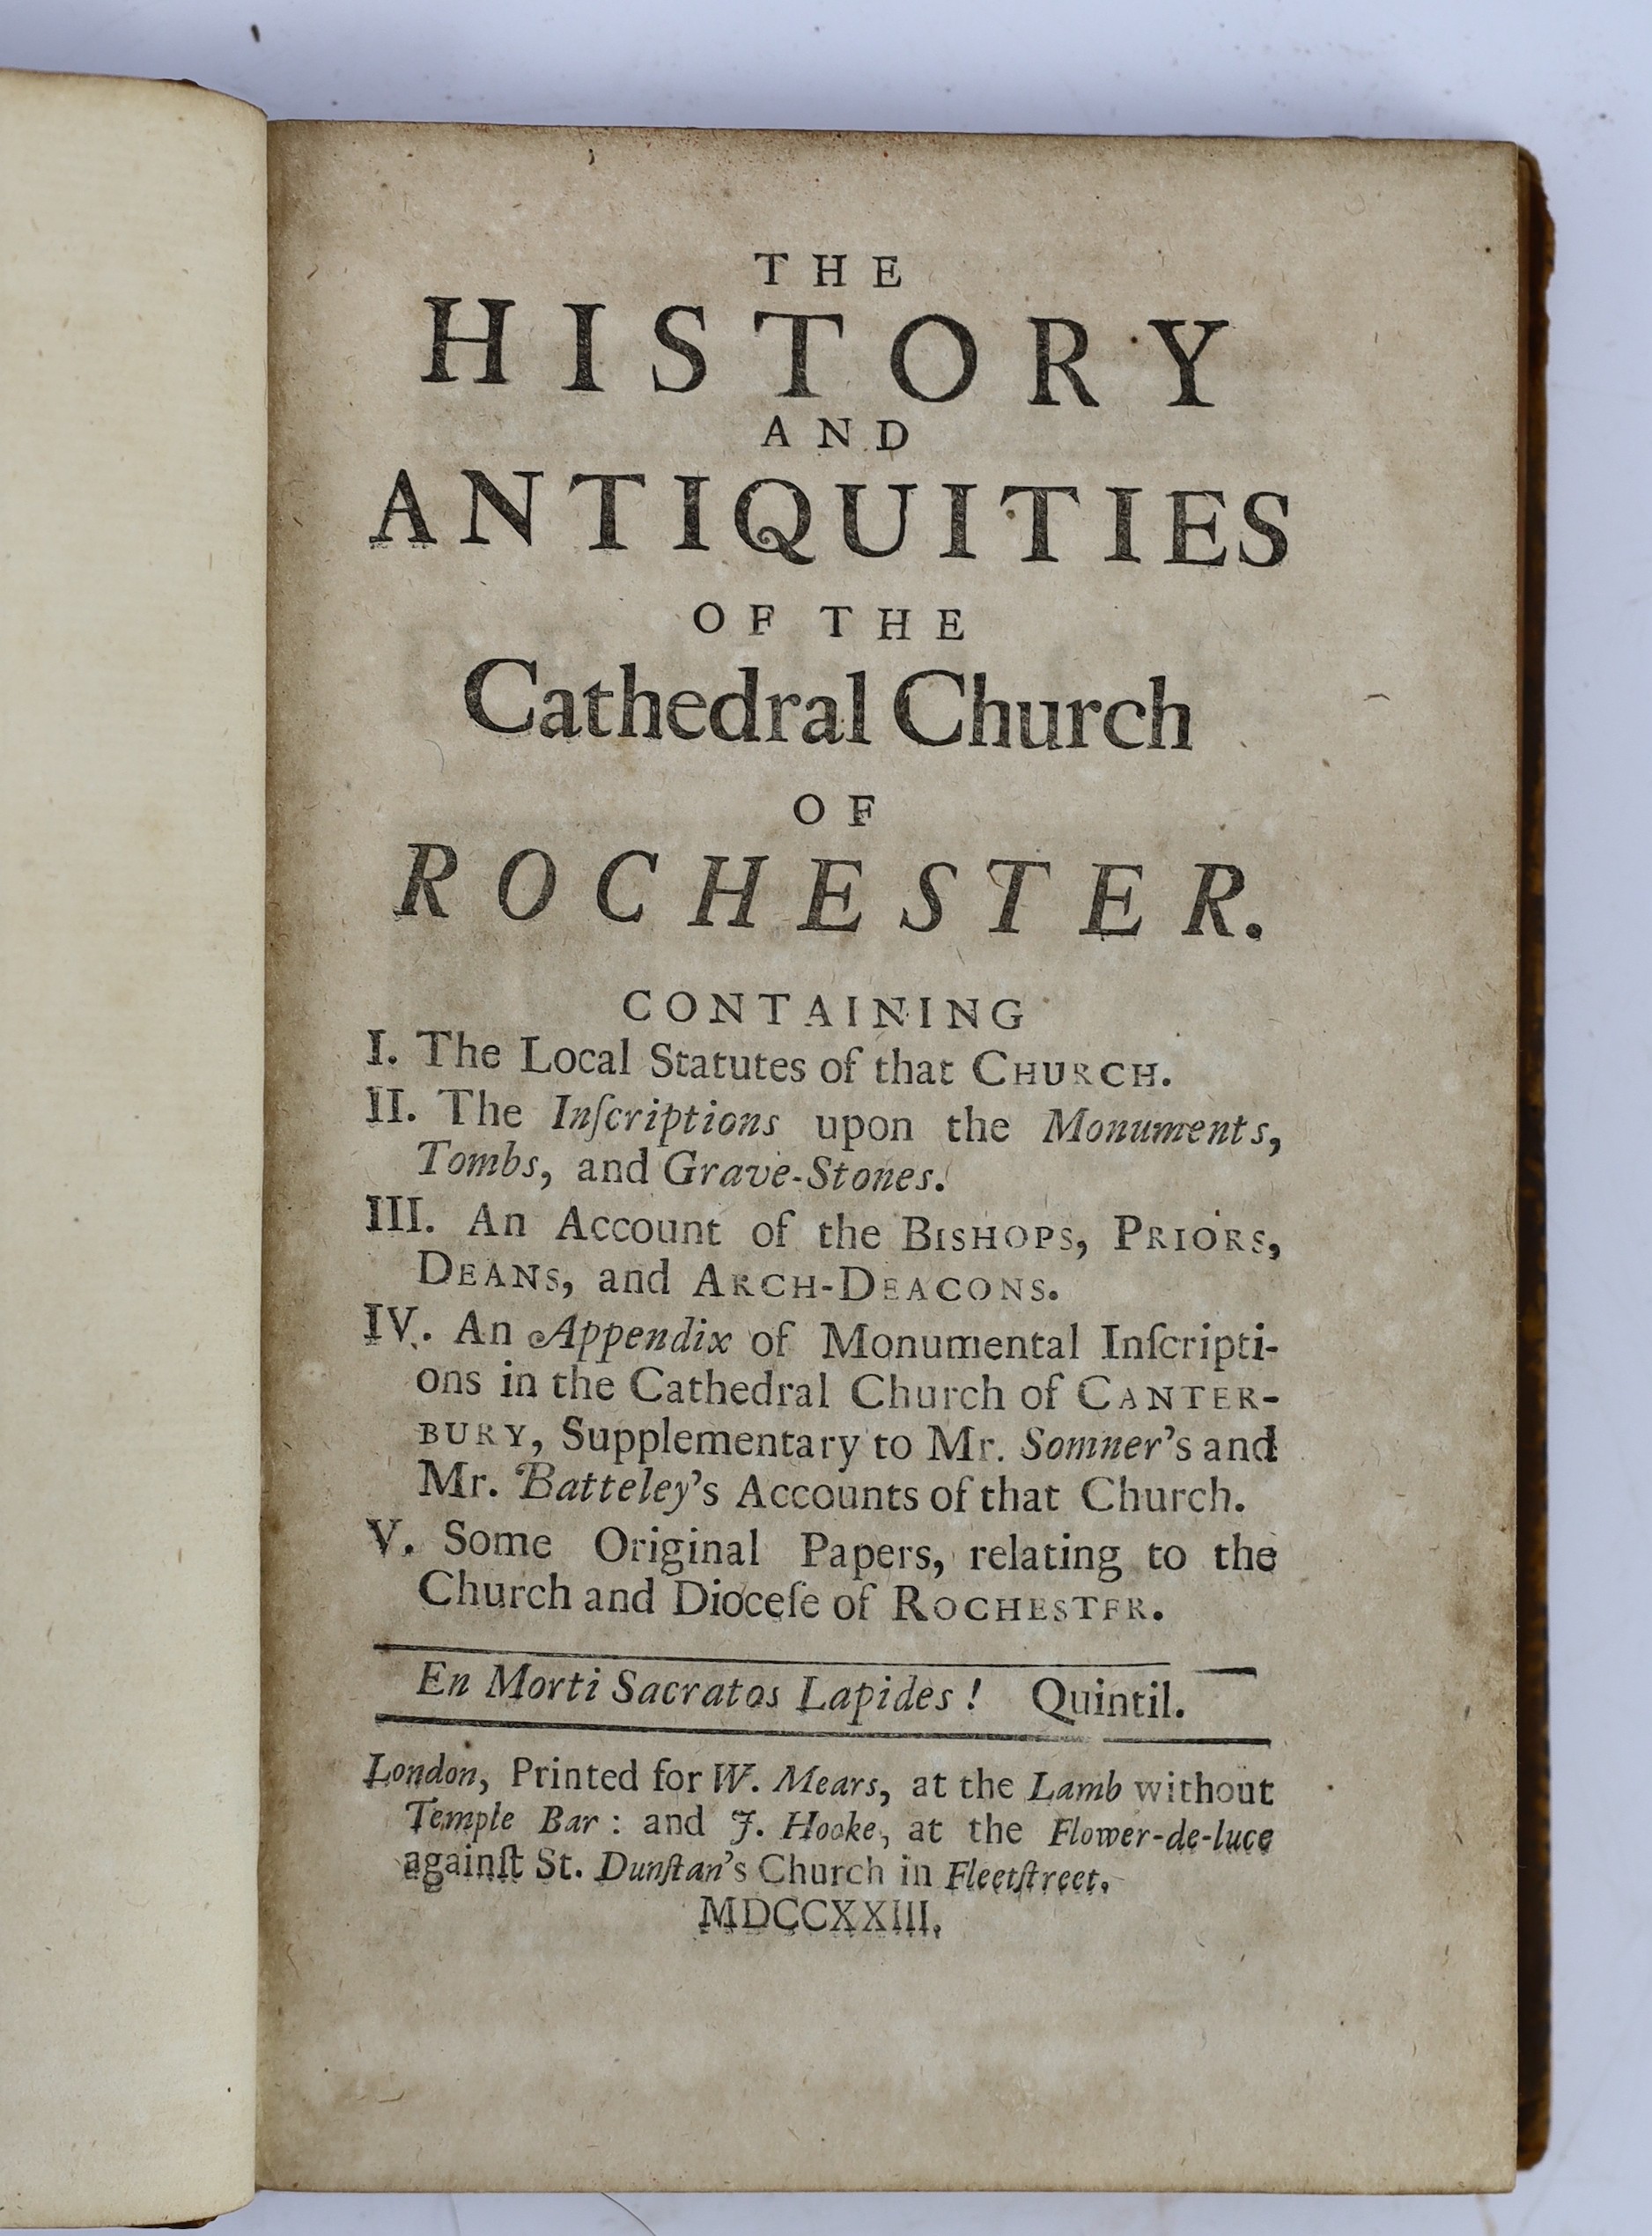 KENT: (? Rawlinson, Richard) The Antiquities of the Cathedral Church of Rochester....text decorations; contemp. gilt ruled calf with panelled spine and red label, sm. 8vo. 1723; Wright's Topography of Rochester, Chatham.